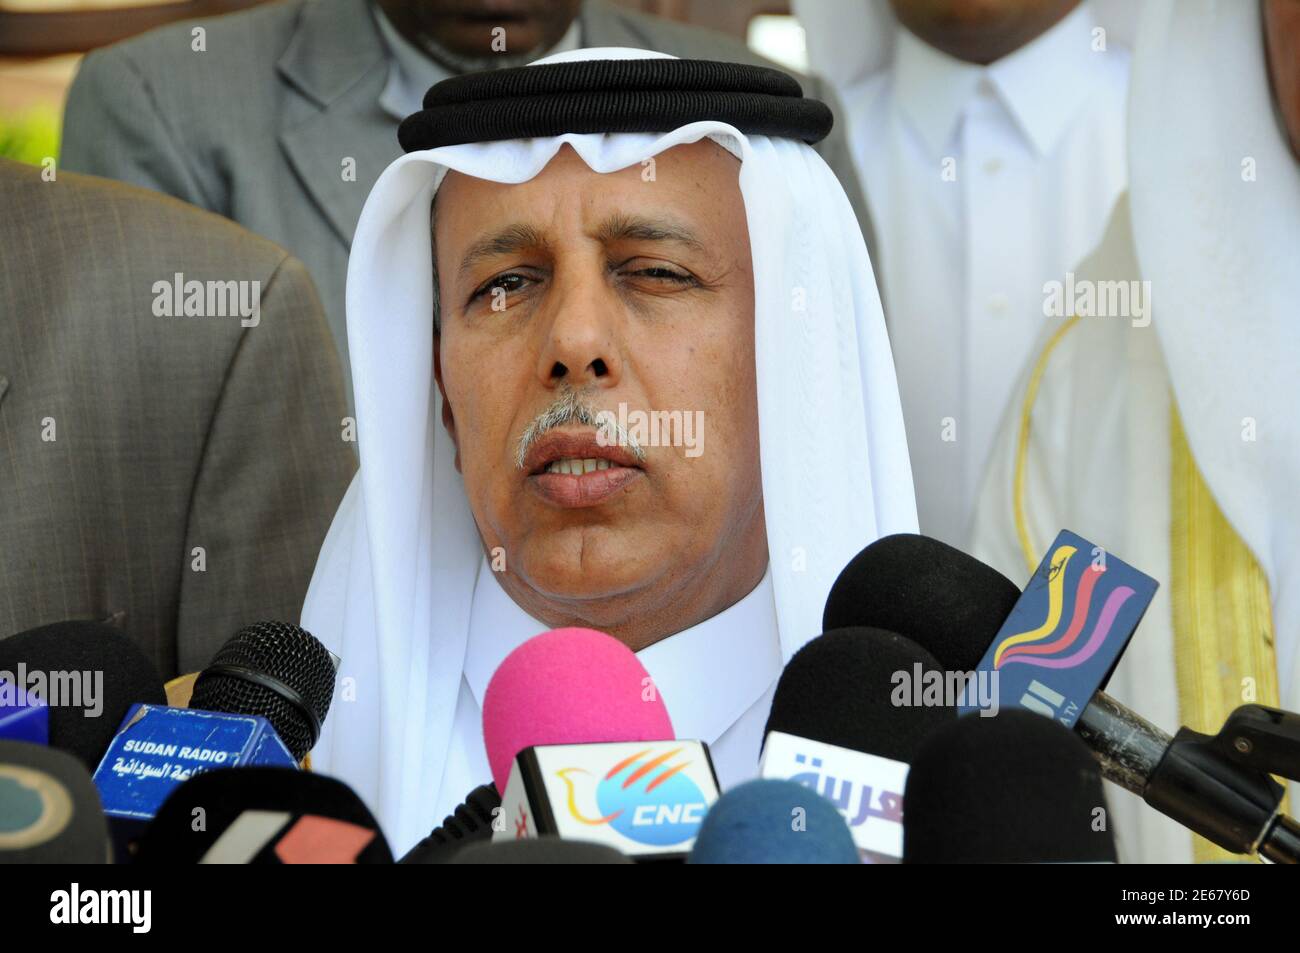 Qatar's Minister of State for Foreign Affairs Ahmed Bin Abdullah Al-Mahmoud  speaks to the media after a meeting with Sudan President Omar Hassan  al-Bashir and Joint U.N./African Union mediator Djibril Bassole in